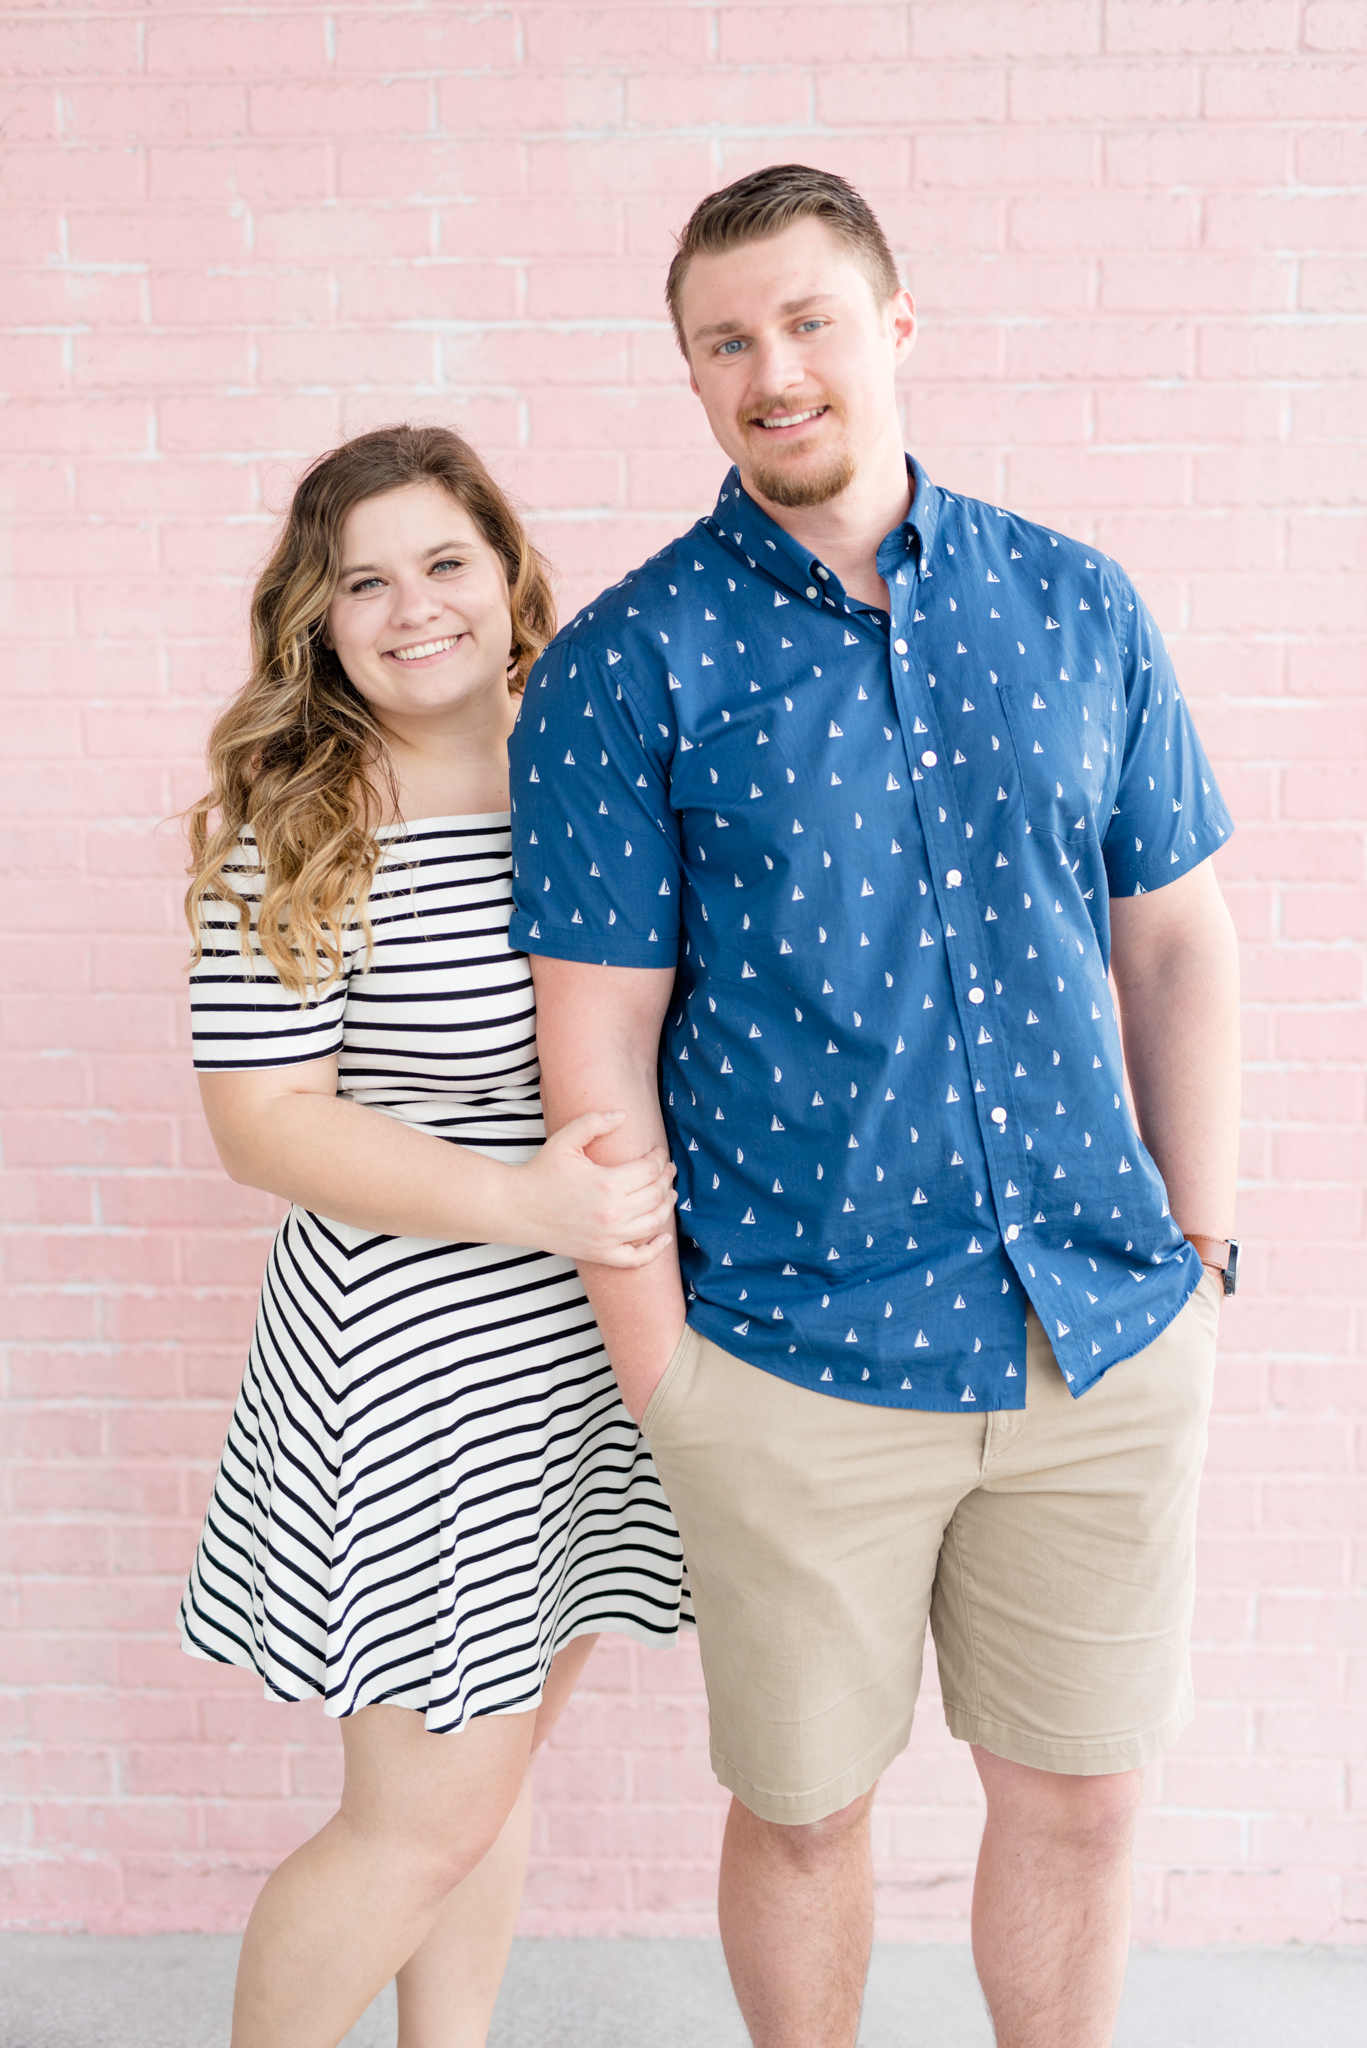 Couple smiles in front of pink wall.